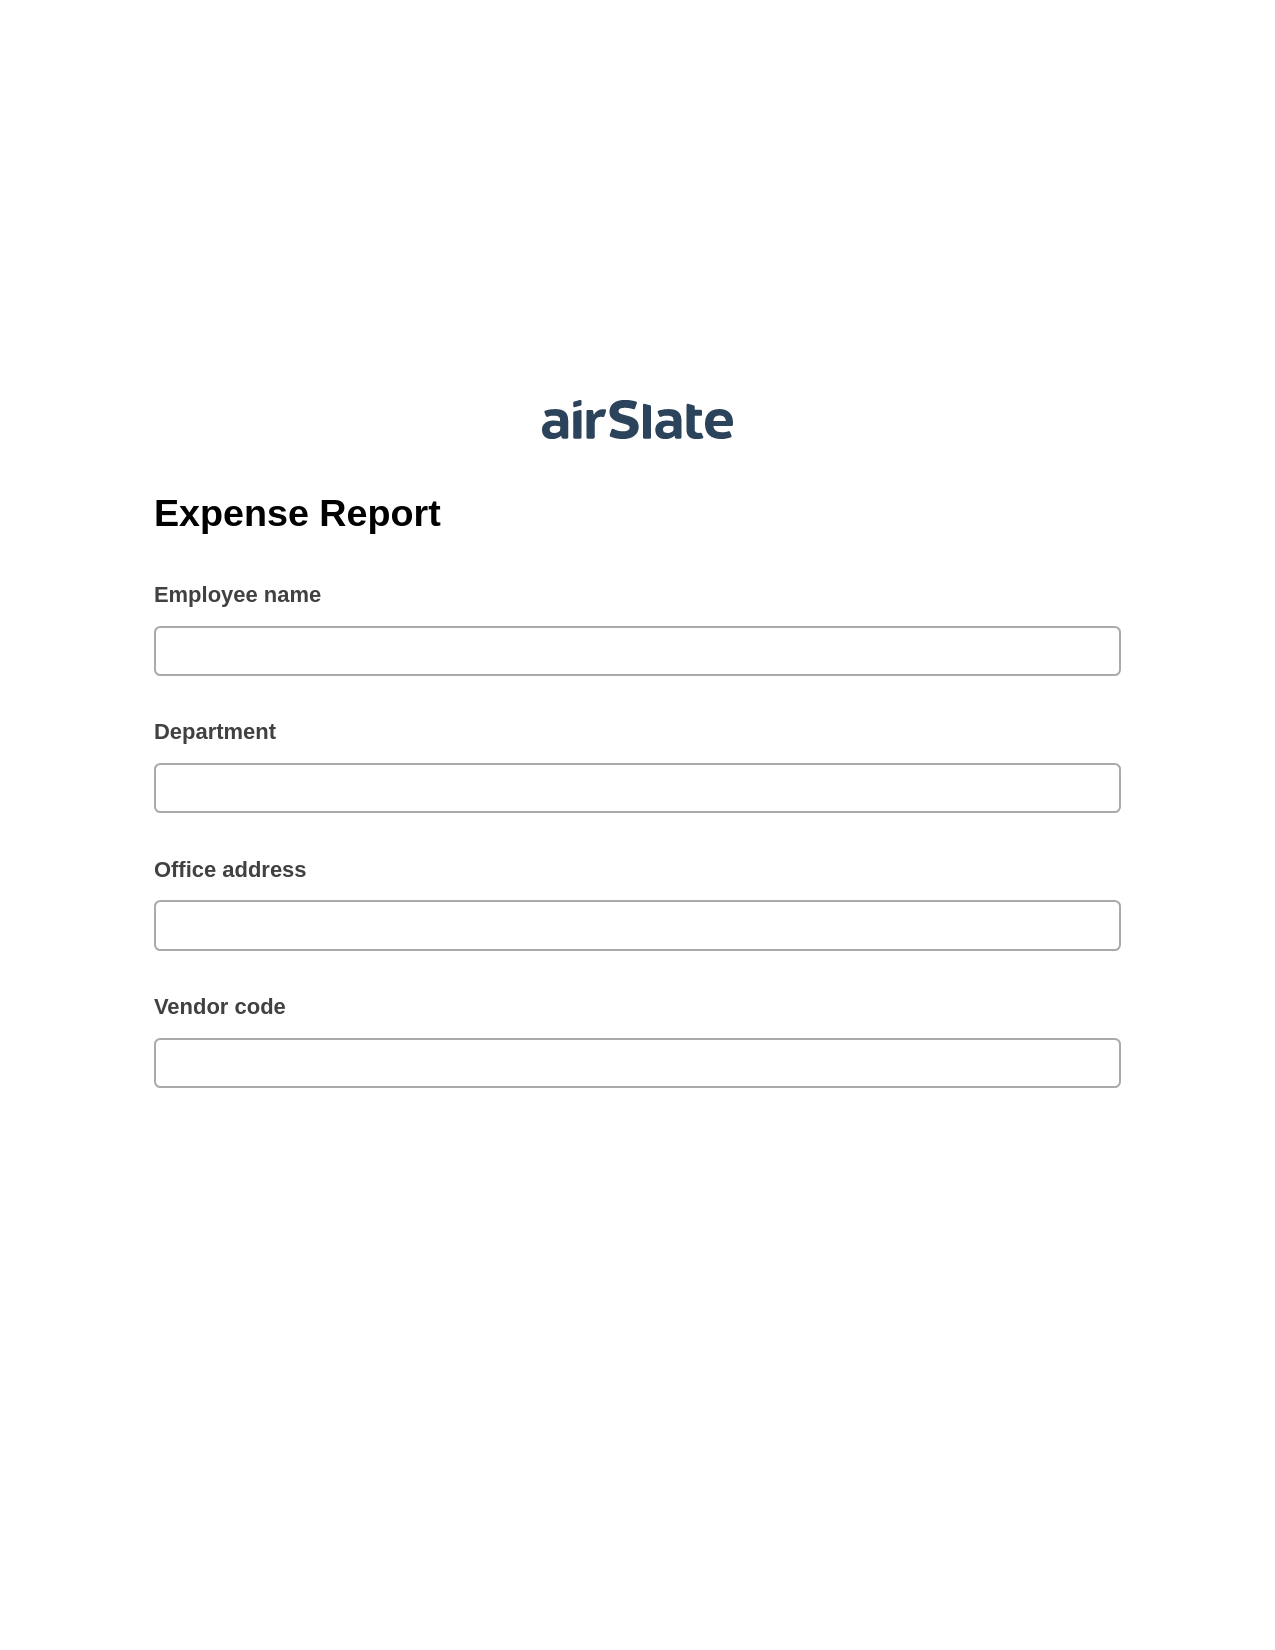 Multirole Expense Report Pre-fill Dropdowns from CSV File Bot, Unassign Role Bot, Post-finish Document Bot